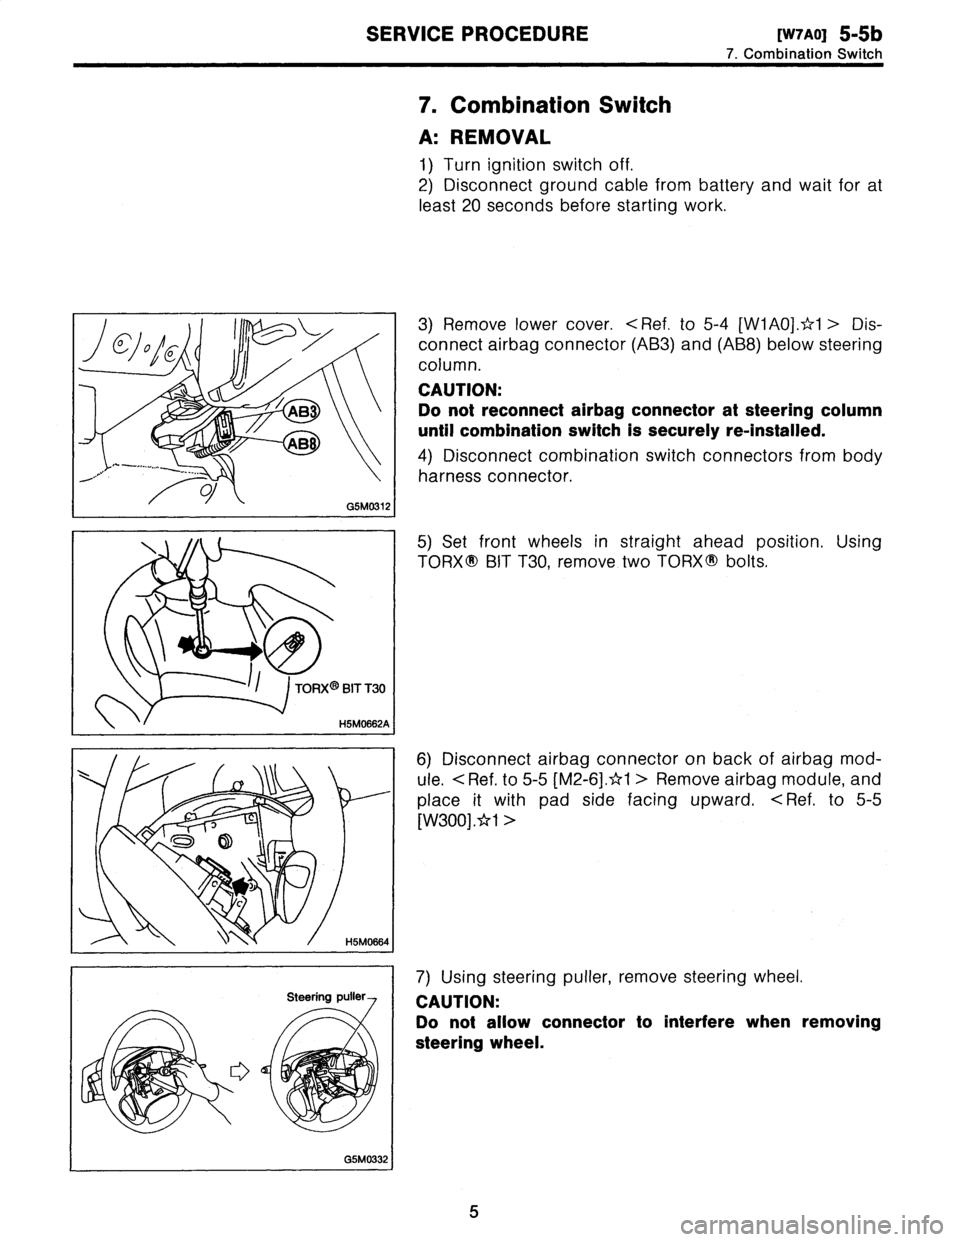 SUBARU LEGACY 1996  Service Repair Manual 
SERVICE
PROCEDURE
[W7AO]
5-5b

7
.
Combination
Switch

7
.
Combination
Switch

)
0)0
C

J

~
AB

,
.,
.
-^o/

G5M0312

A
:
REMOVAL

1)
Turn
ignition
switch
off
.

2)
Disconnect
ground
cable
from
batt